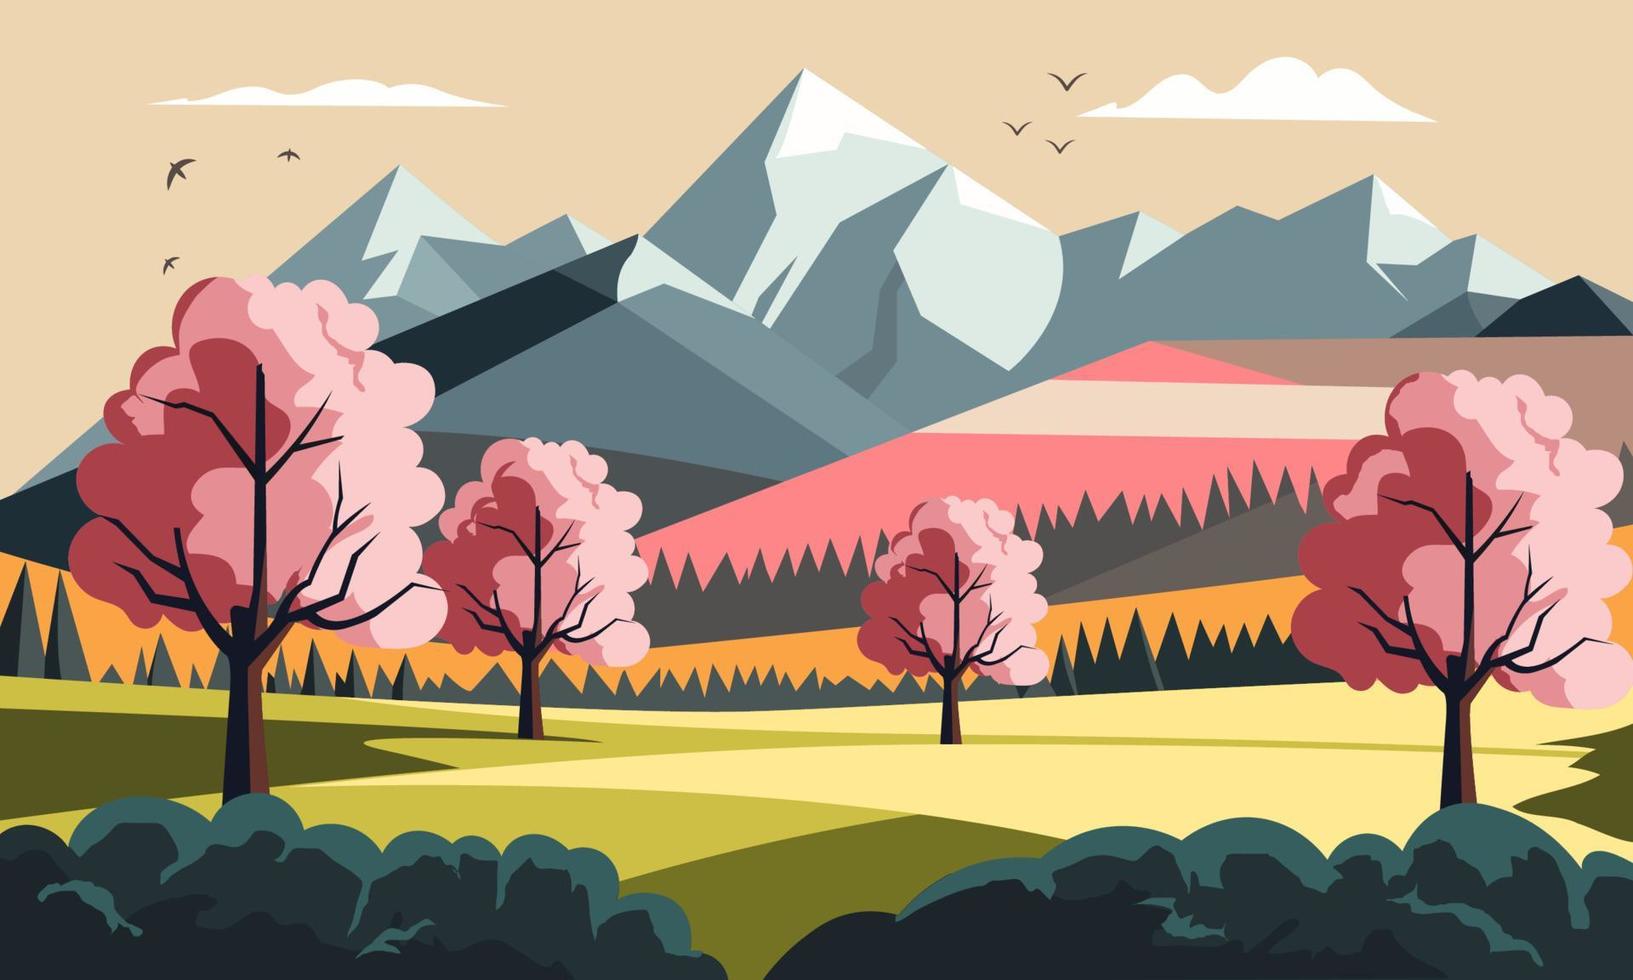 Beautiful Nature Landscape Background With Mountains, Trees And Flying Birds. vector